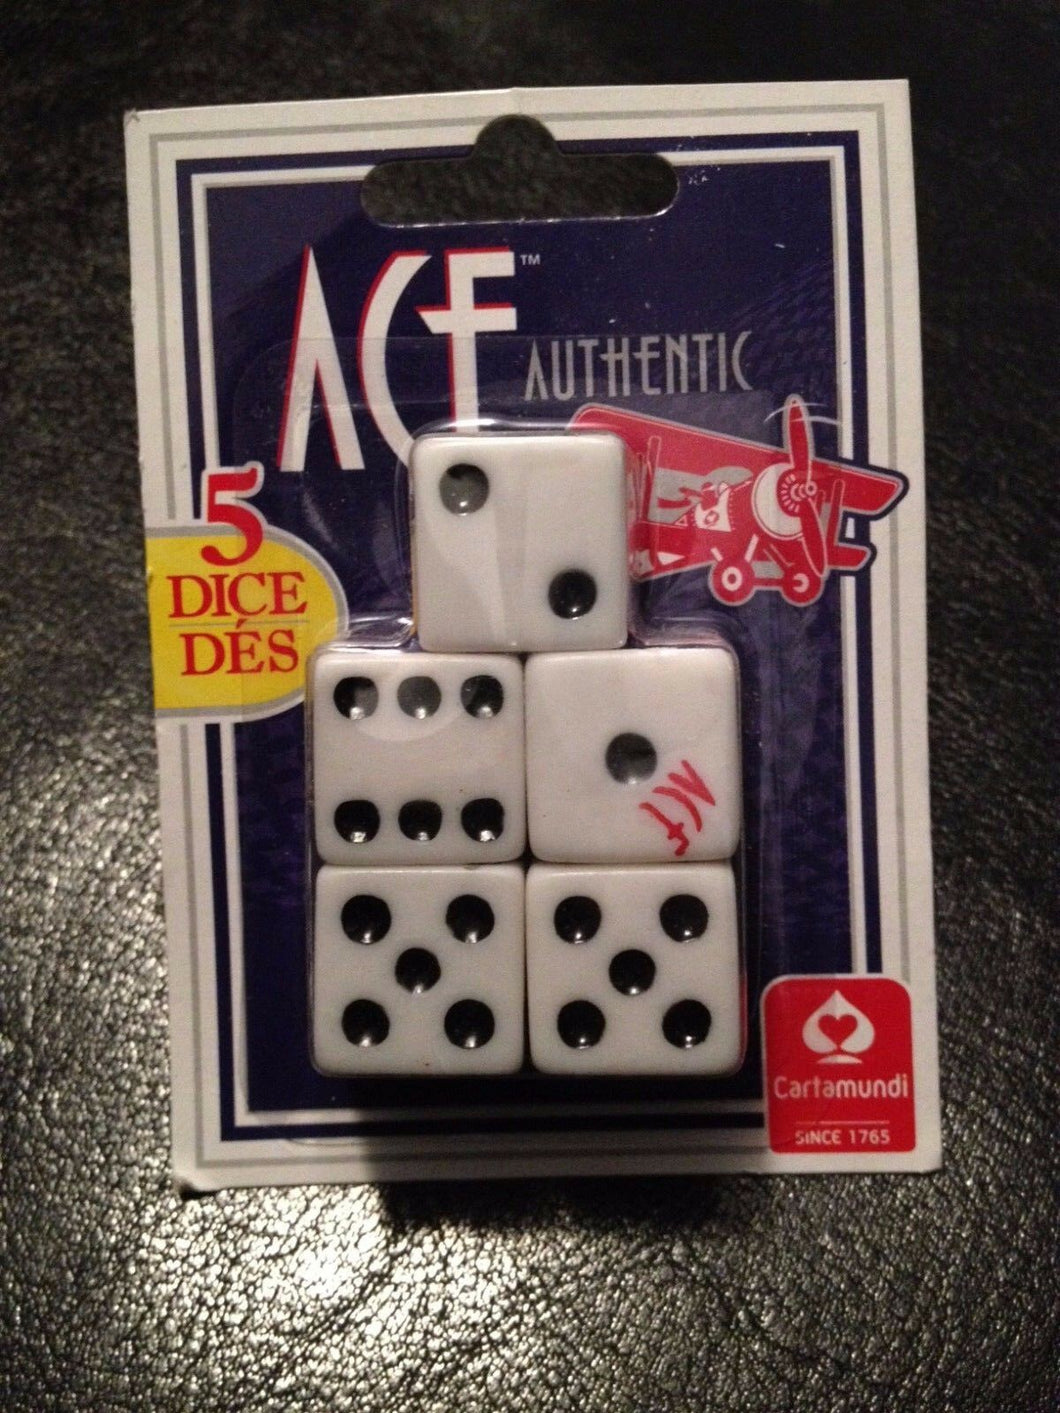 Dice (5 pack) - Jokes, Gags and Pranks - Five Standard Ace Authentic Dice!